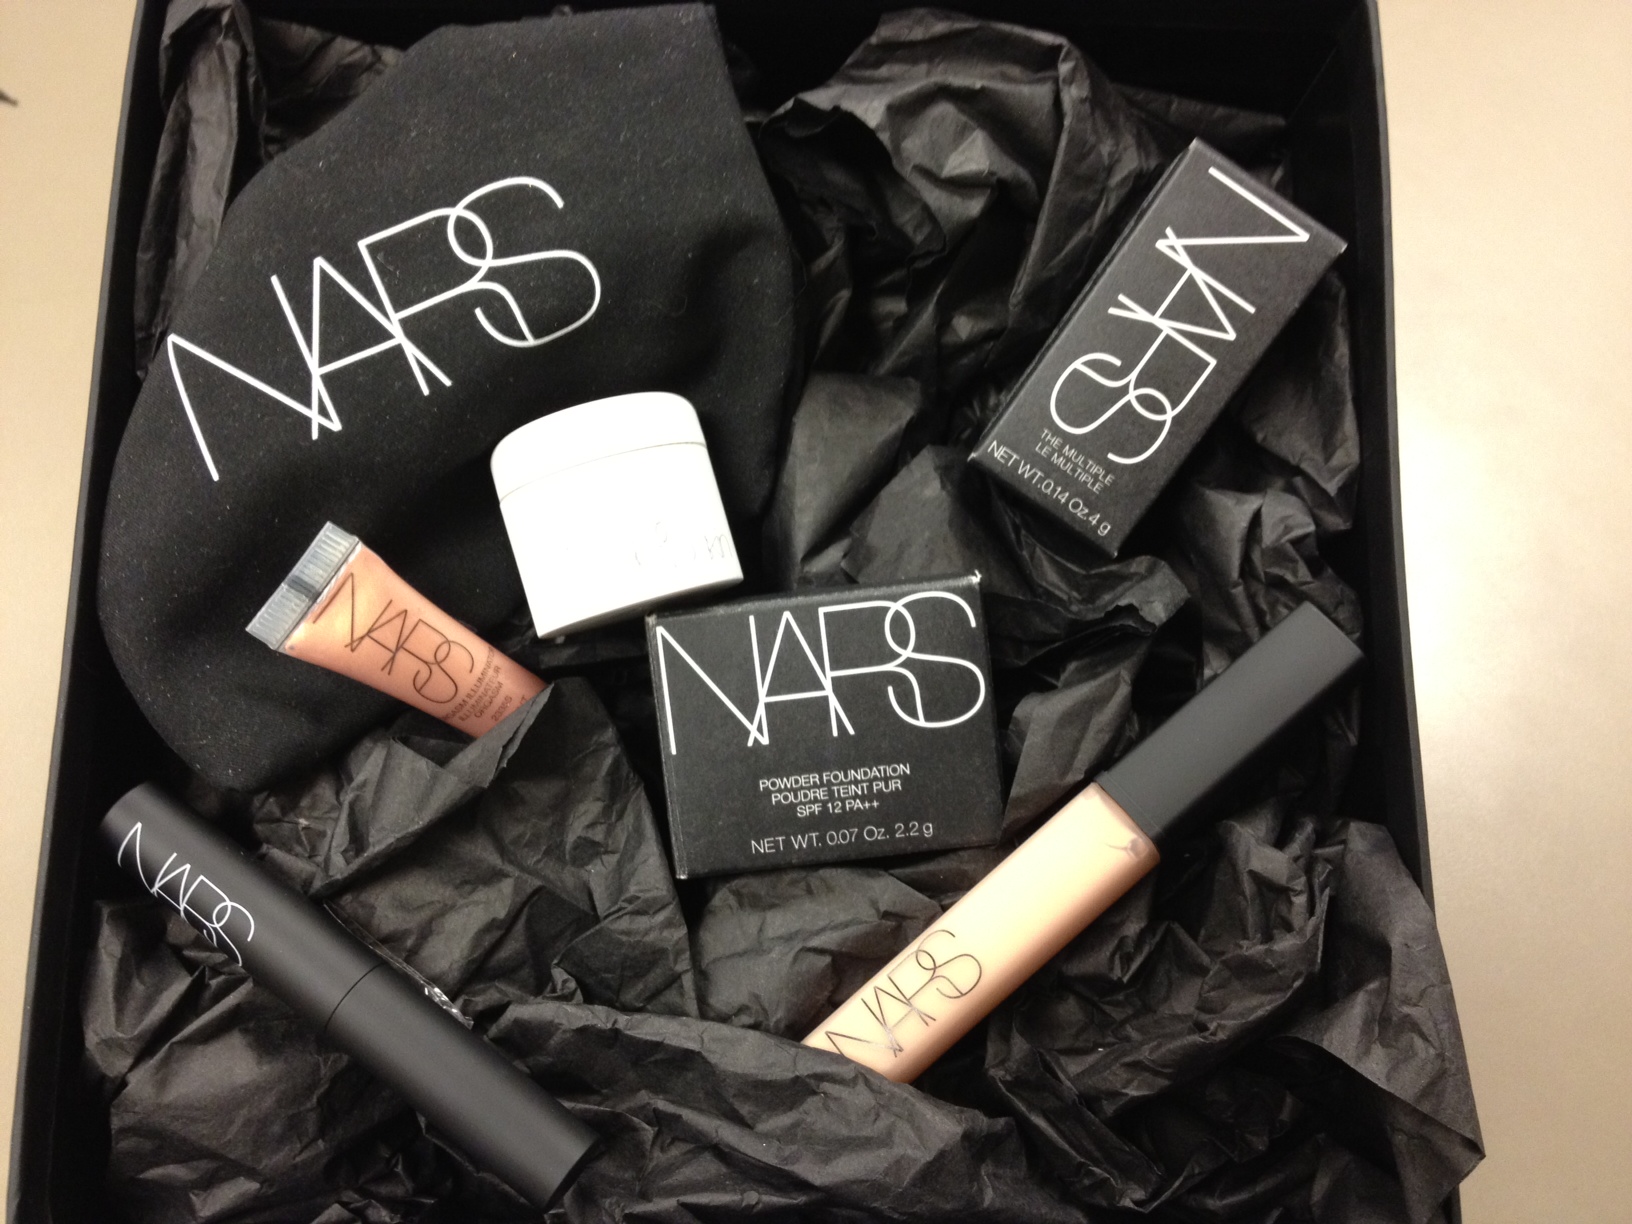 Enter NARS ‘Holiday Look’ event Giveaway!